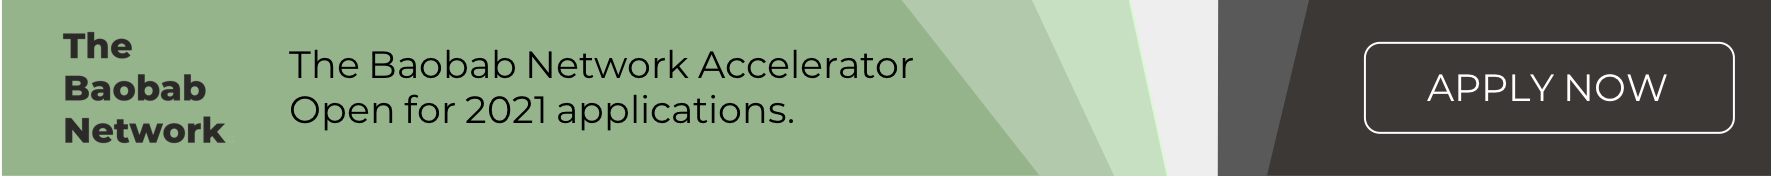 The Baobab Network Accelerator Applications Banner